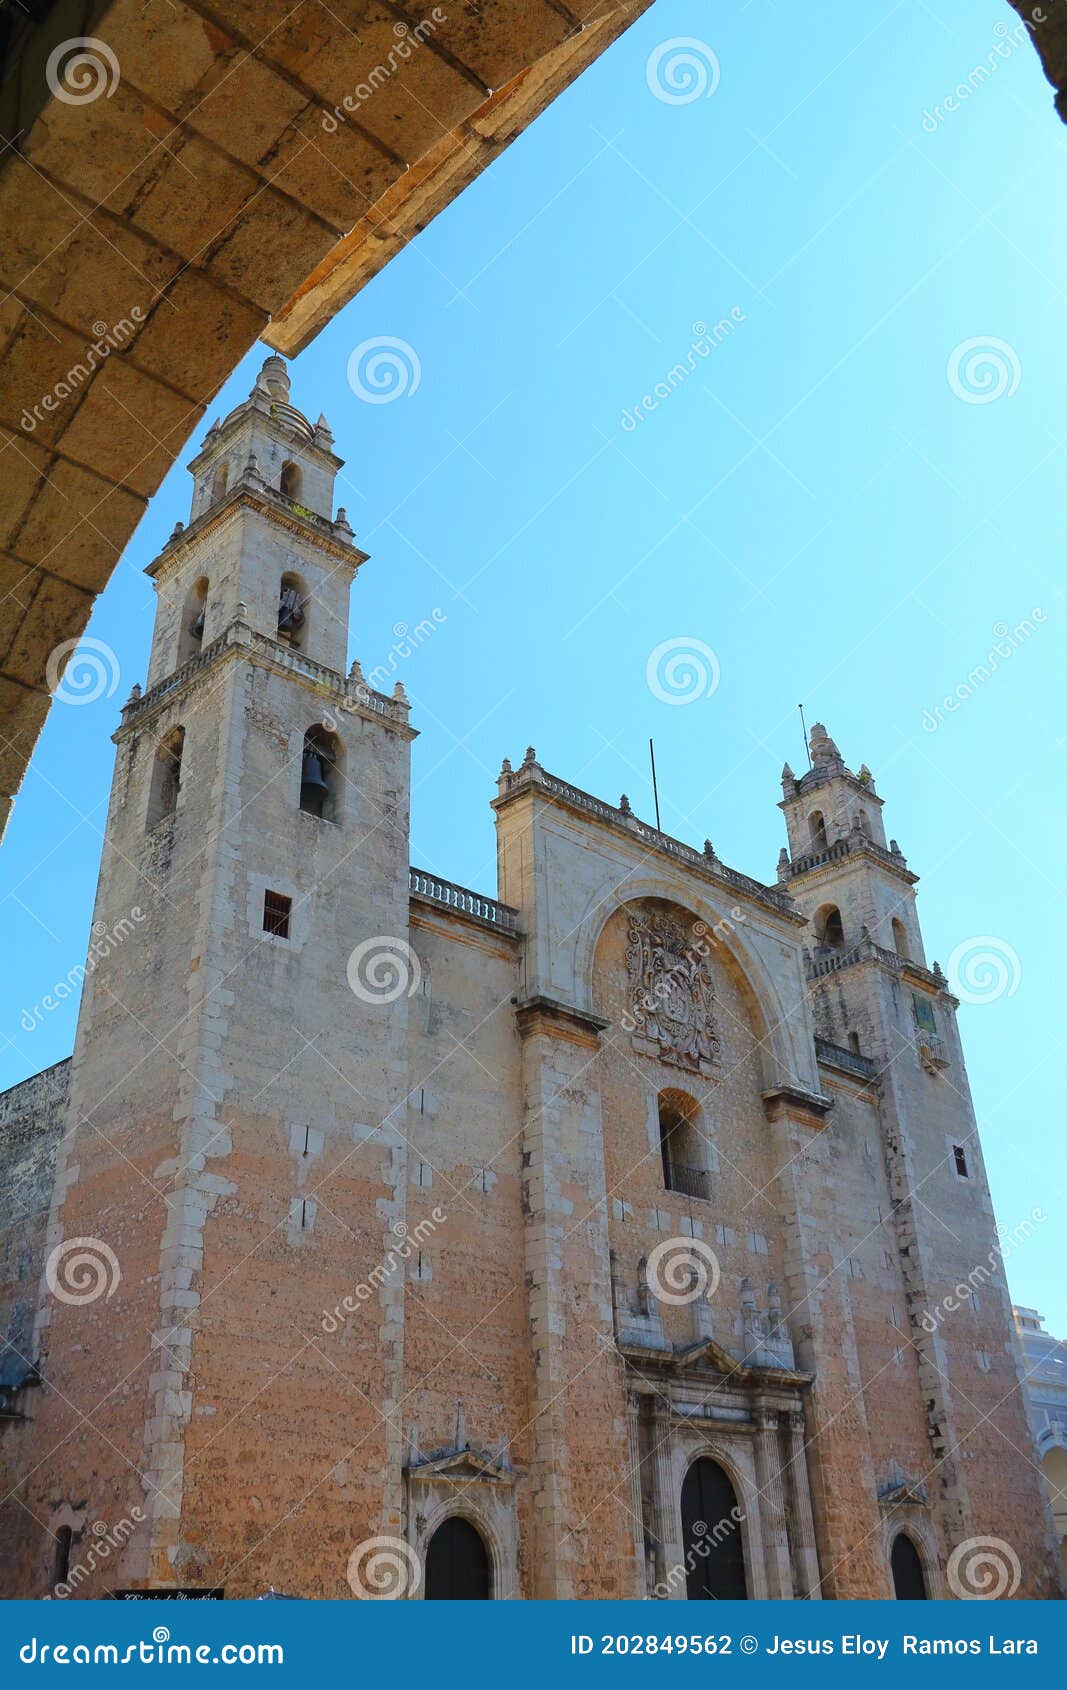 cathedral of the merida city in yucatan, mexico v